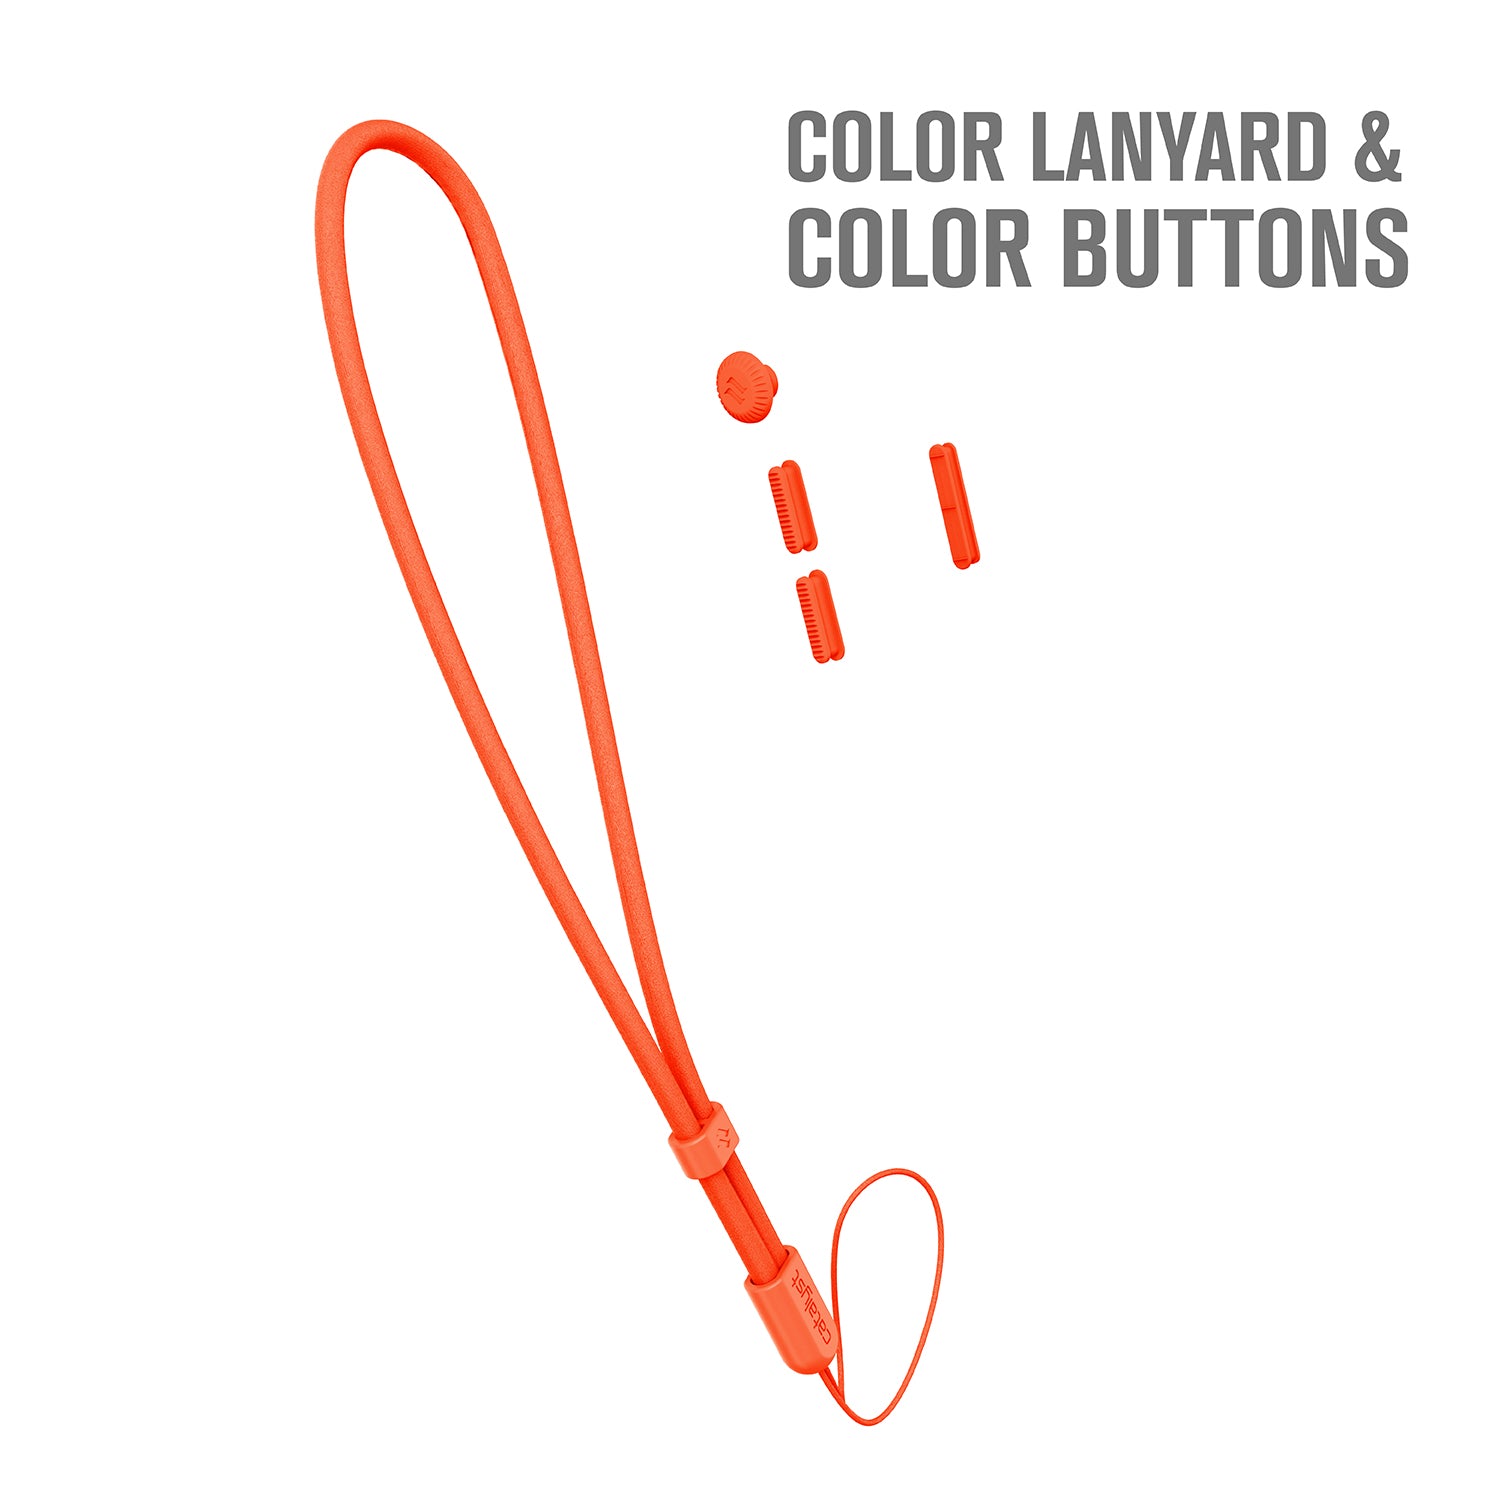 catalyst colored lanyard & buttons product itself orange text reads color lanyard & color buttons